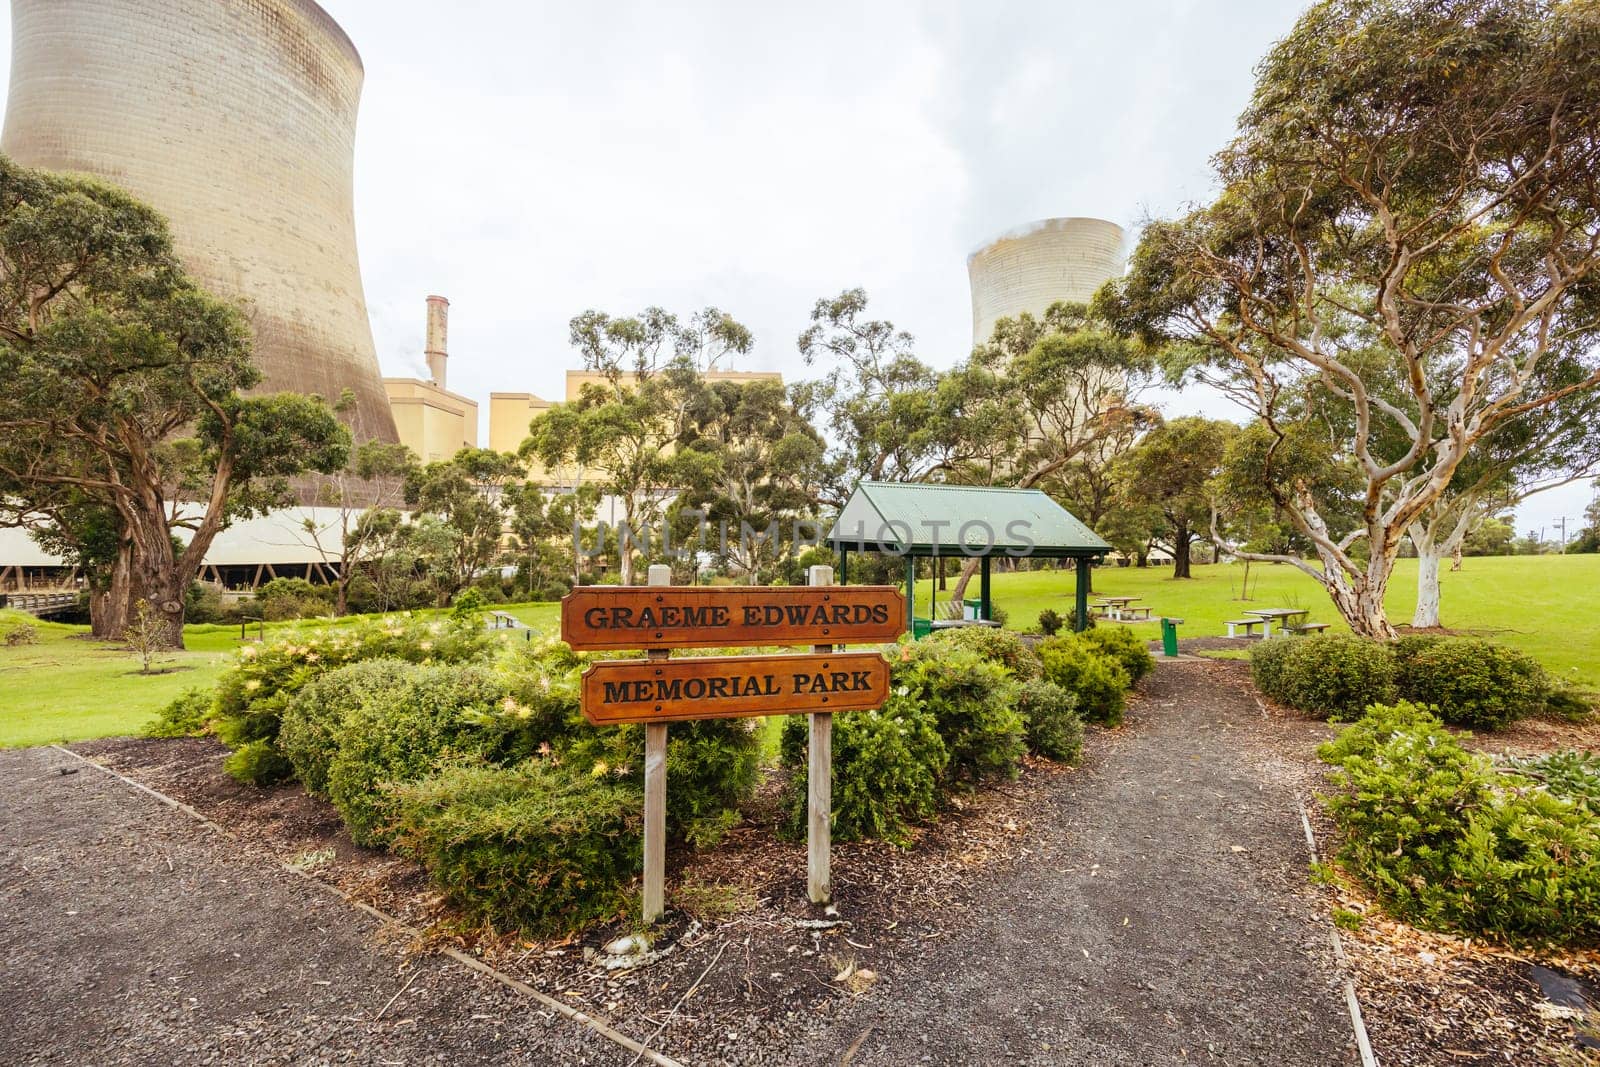 Graeme Edwards Memorial Park near Yallourn Power Station built as a memory of an employee killed at the plant. Based near the town of Yallourn, in Victoria, Australia